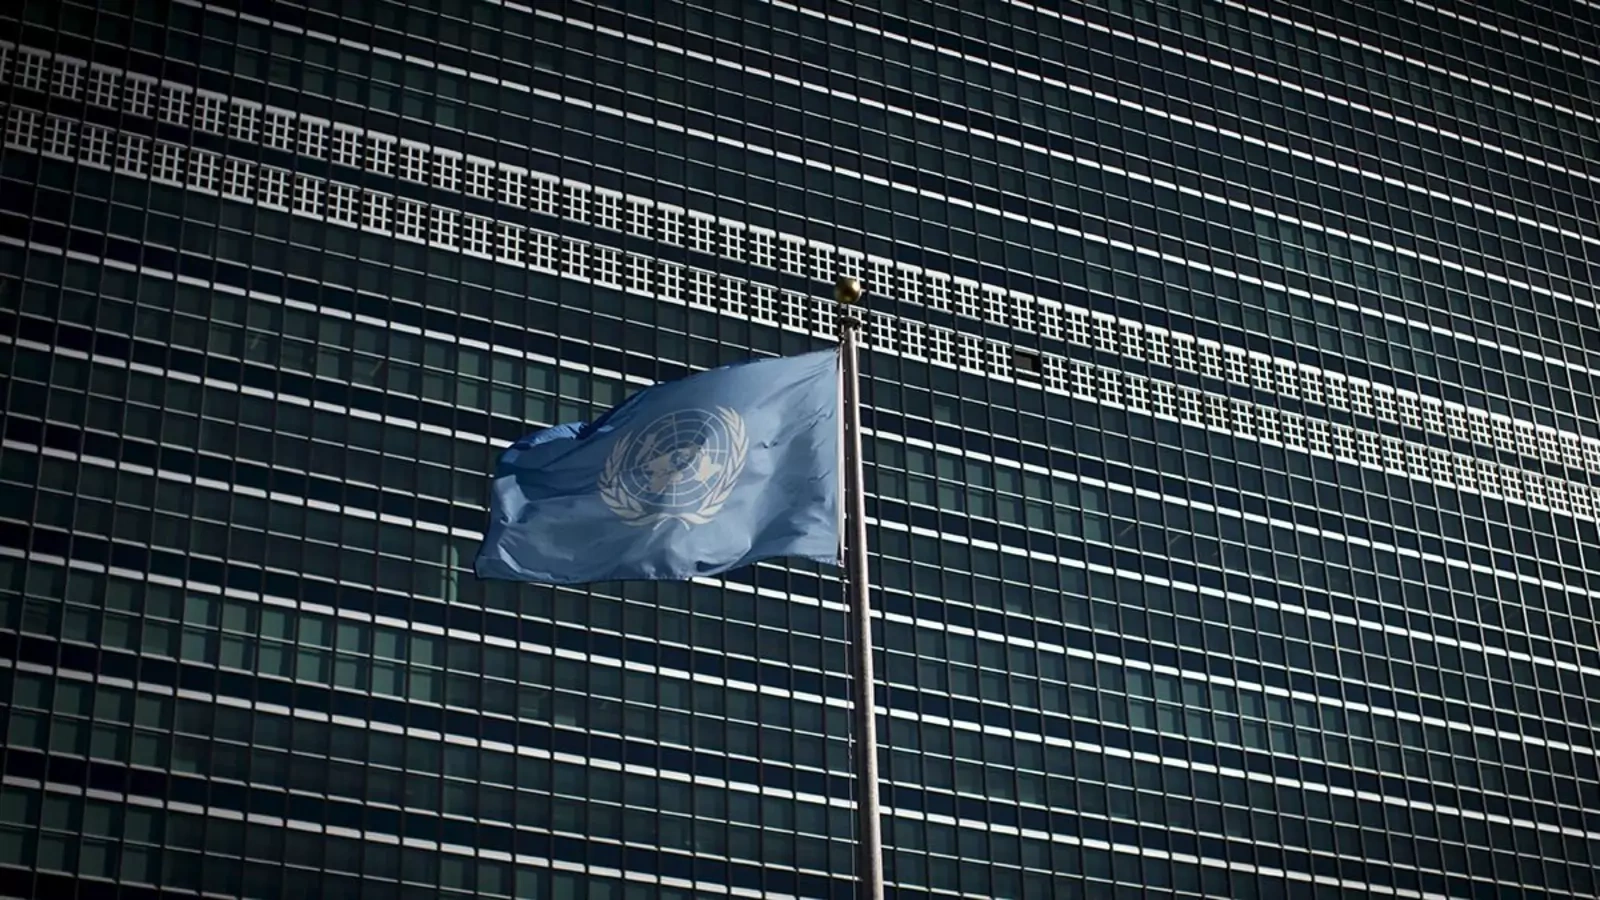 The United Nations flag flies in front of the organization's headquarters in New York in 2015.